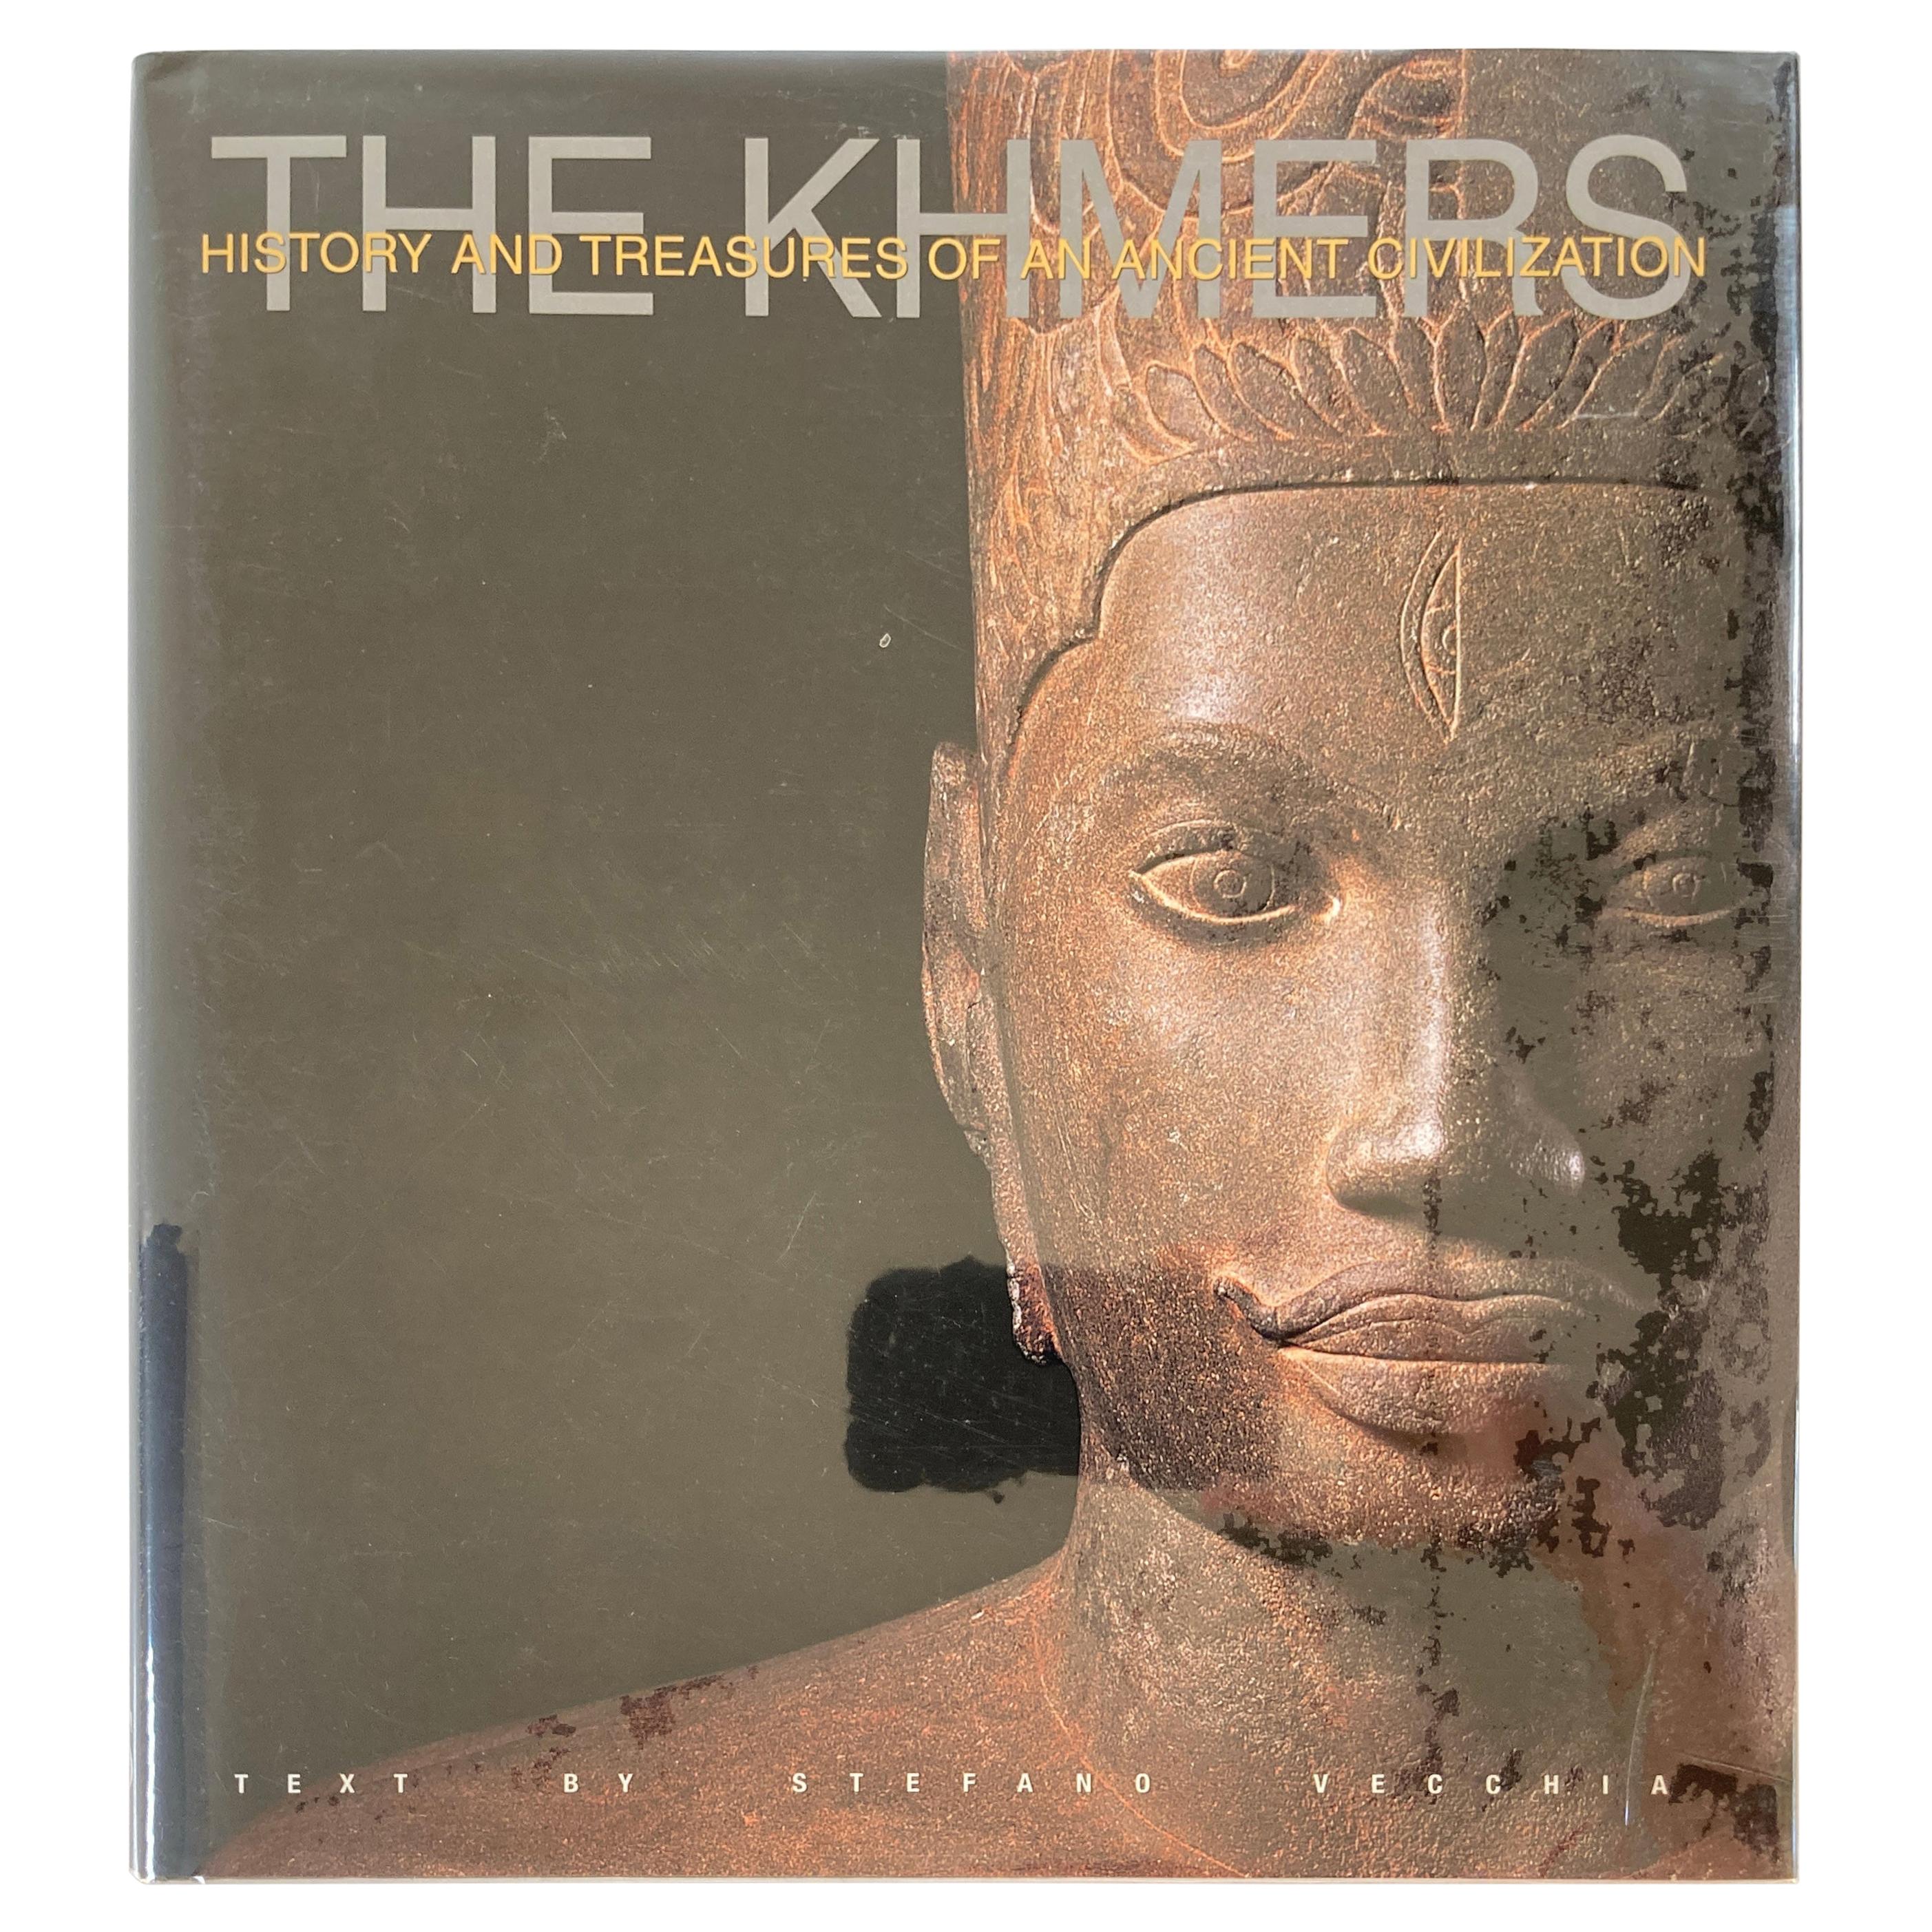 The Khmers History and Treasures of an Ancient Civilization Art Book